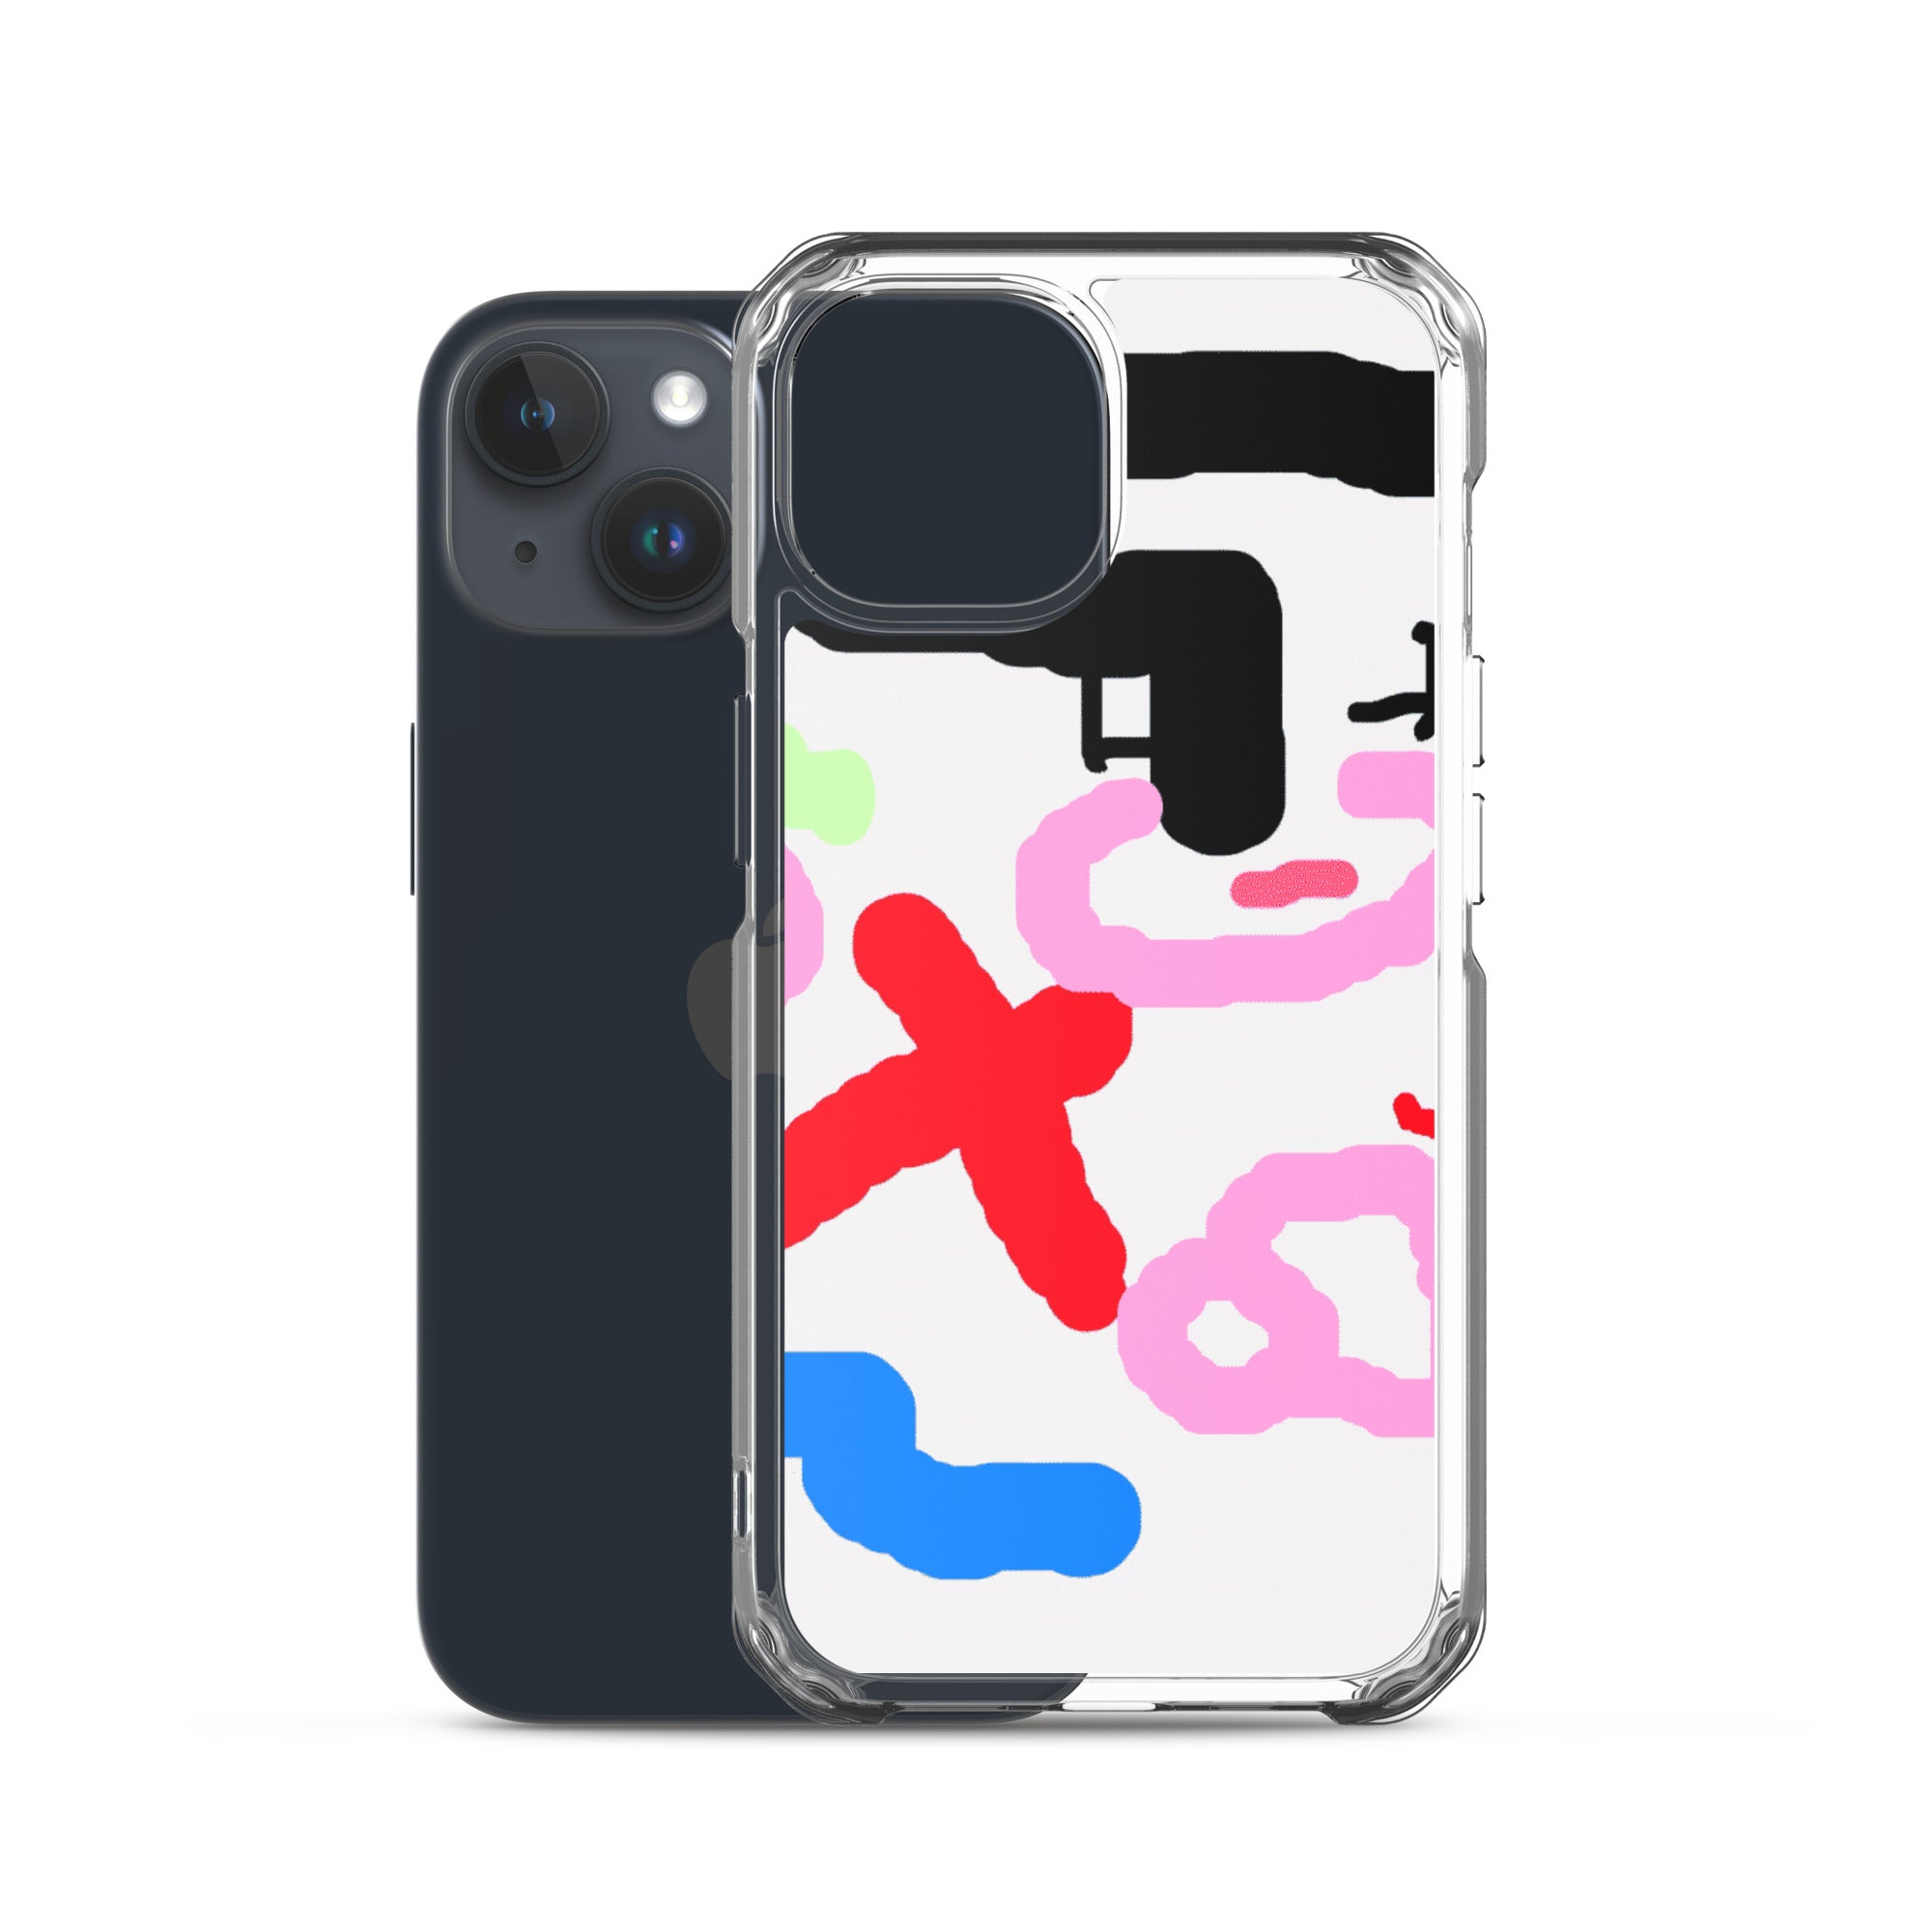 MESS1® iPhone case